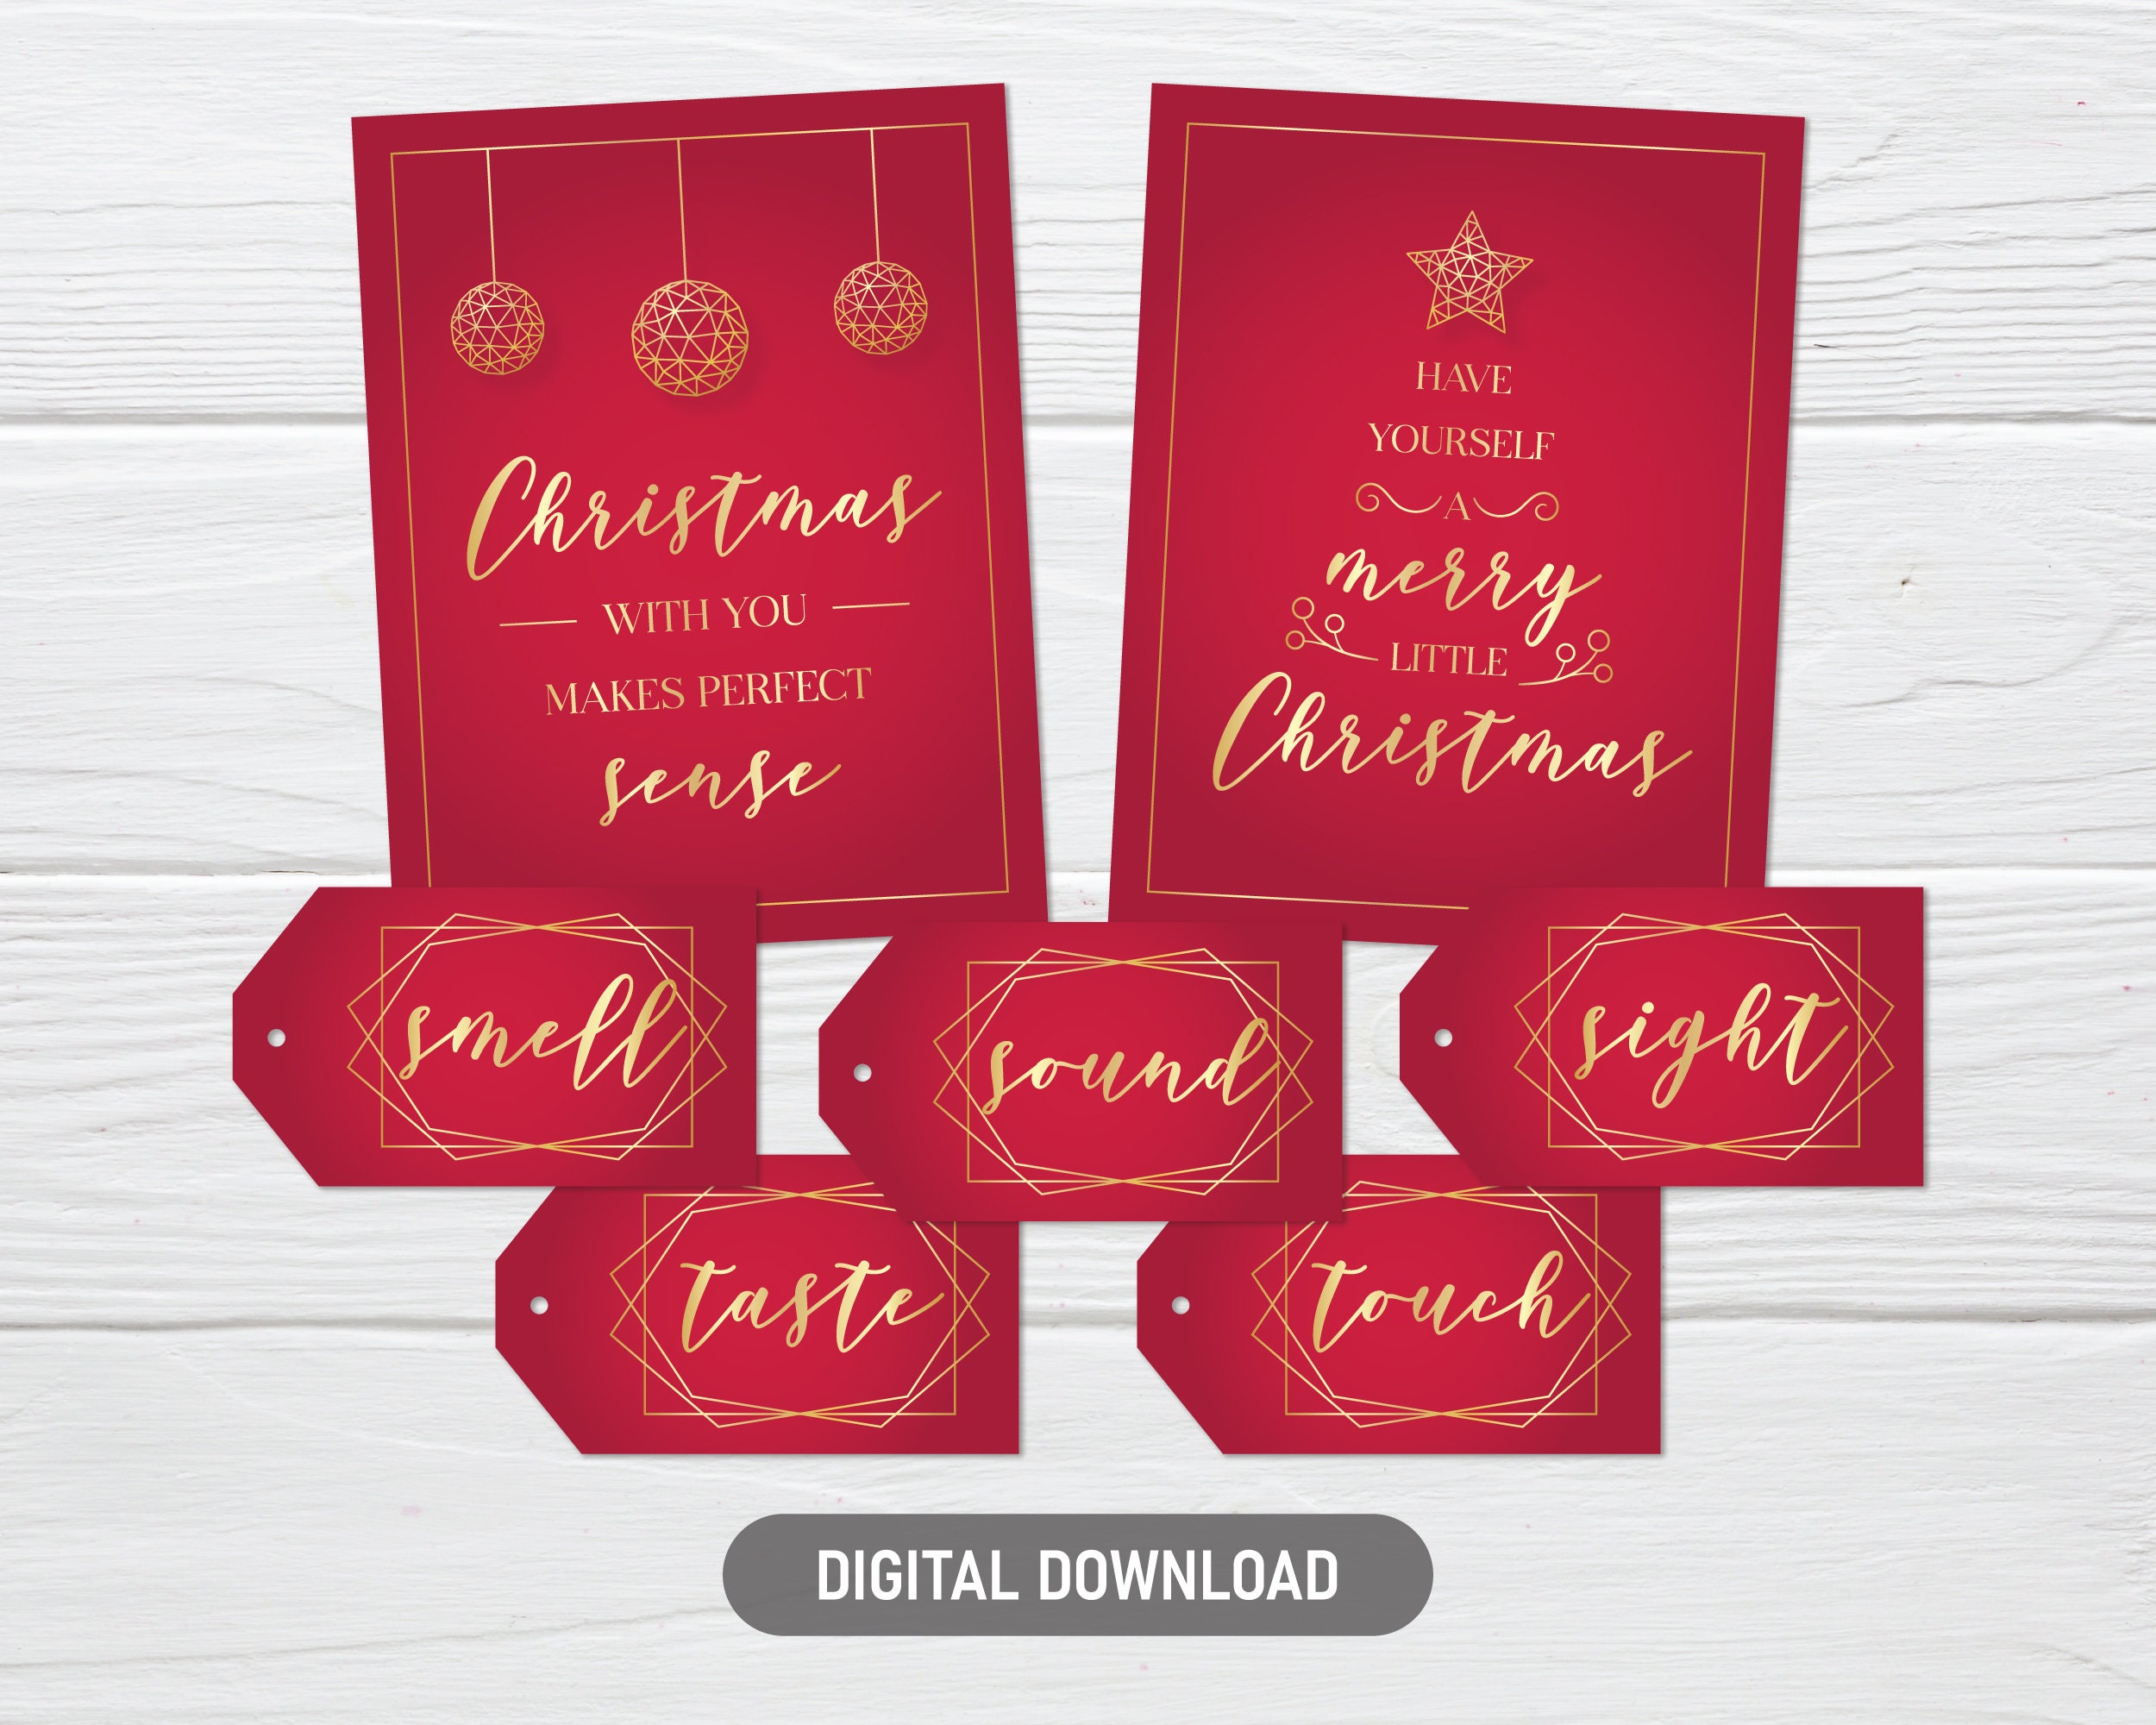 Romantic Five Senses Gift Tags & Card. Instant Download Printable. DIY  Christmas Gift for Him Her. 5 Senses Valentine's Love. Birthday. 